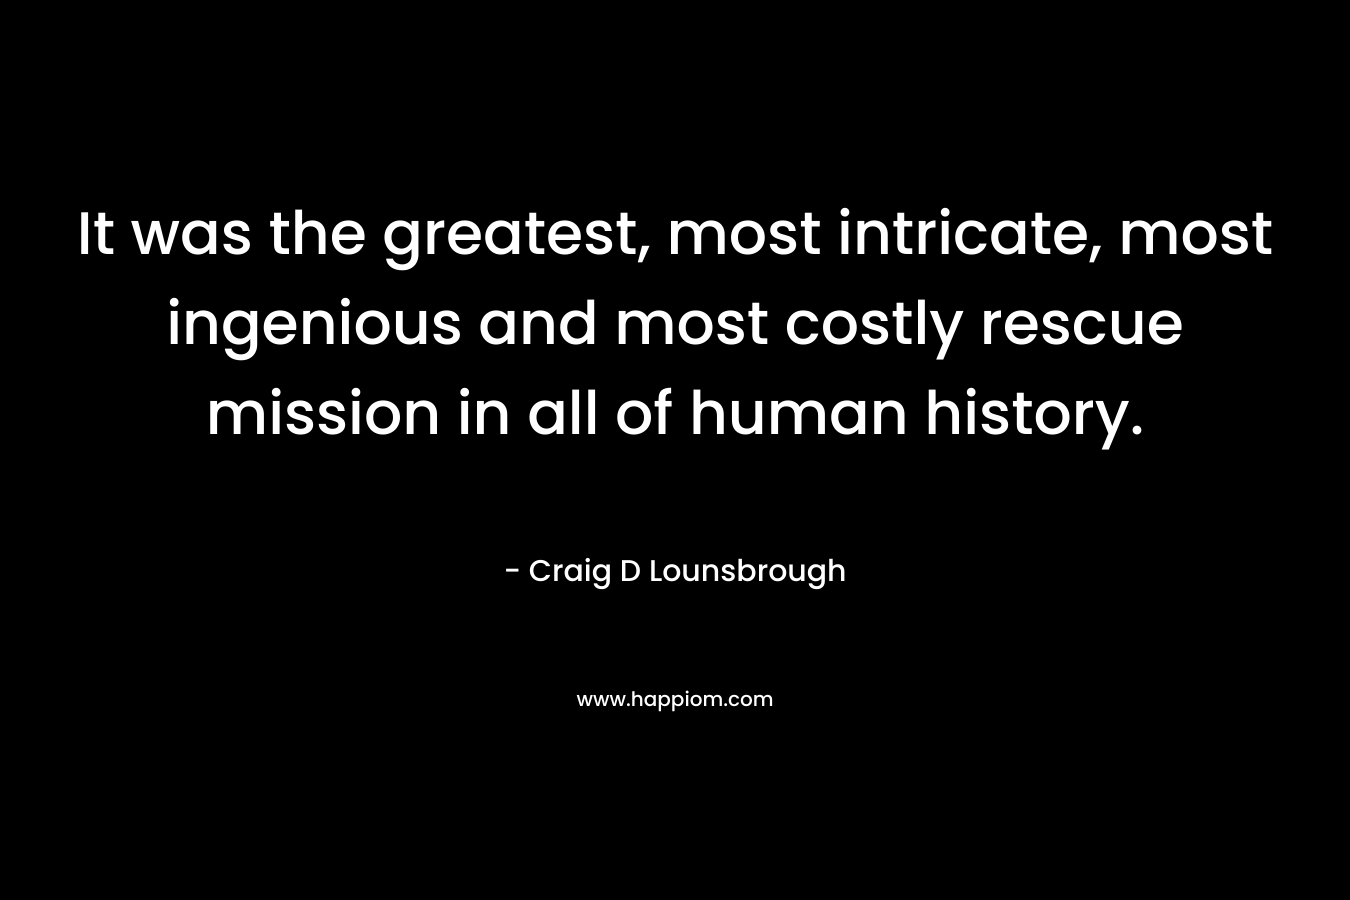 It was the greatest, most intricate, most ingenious and most costly rescue mission in all of human history. – Craig D Lounsbrough